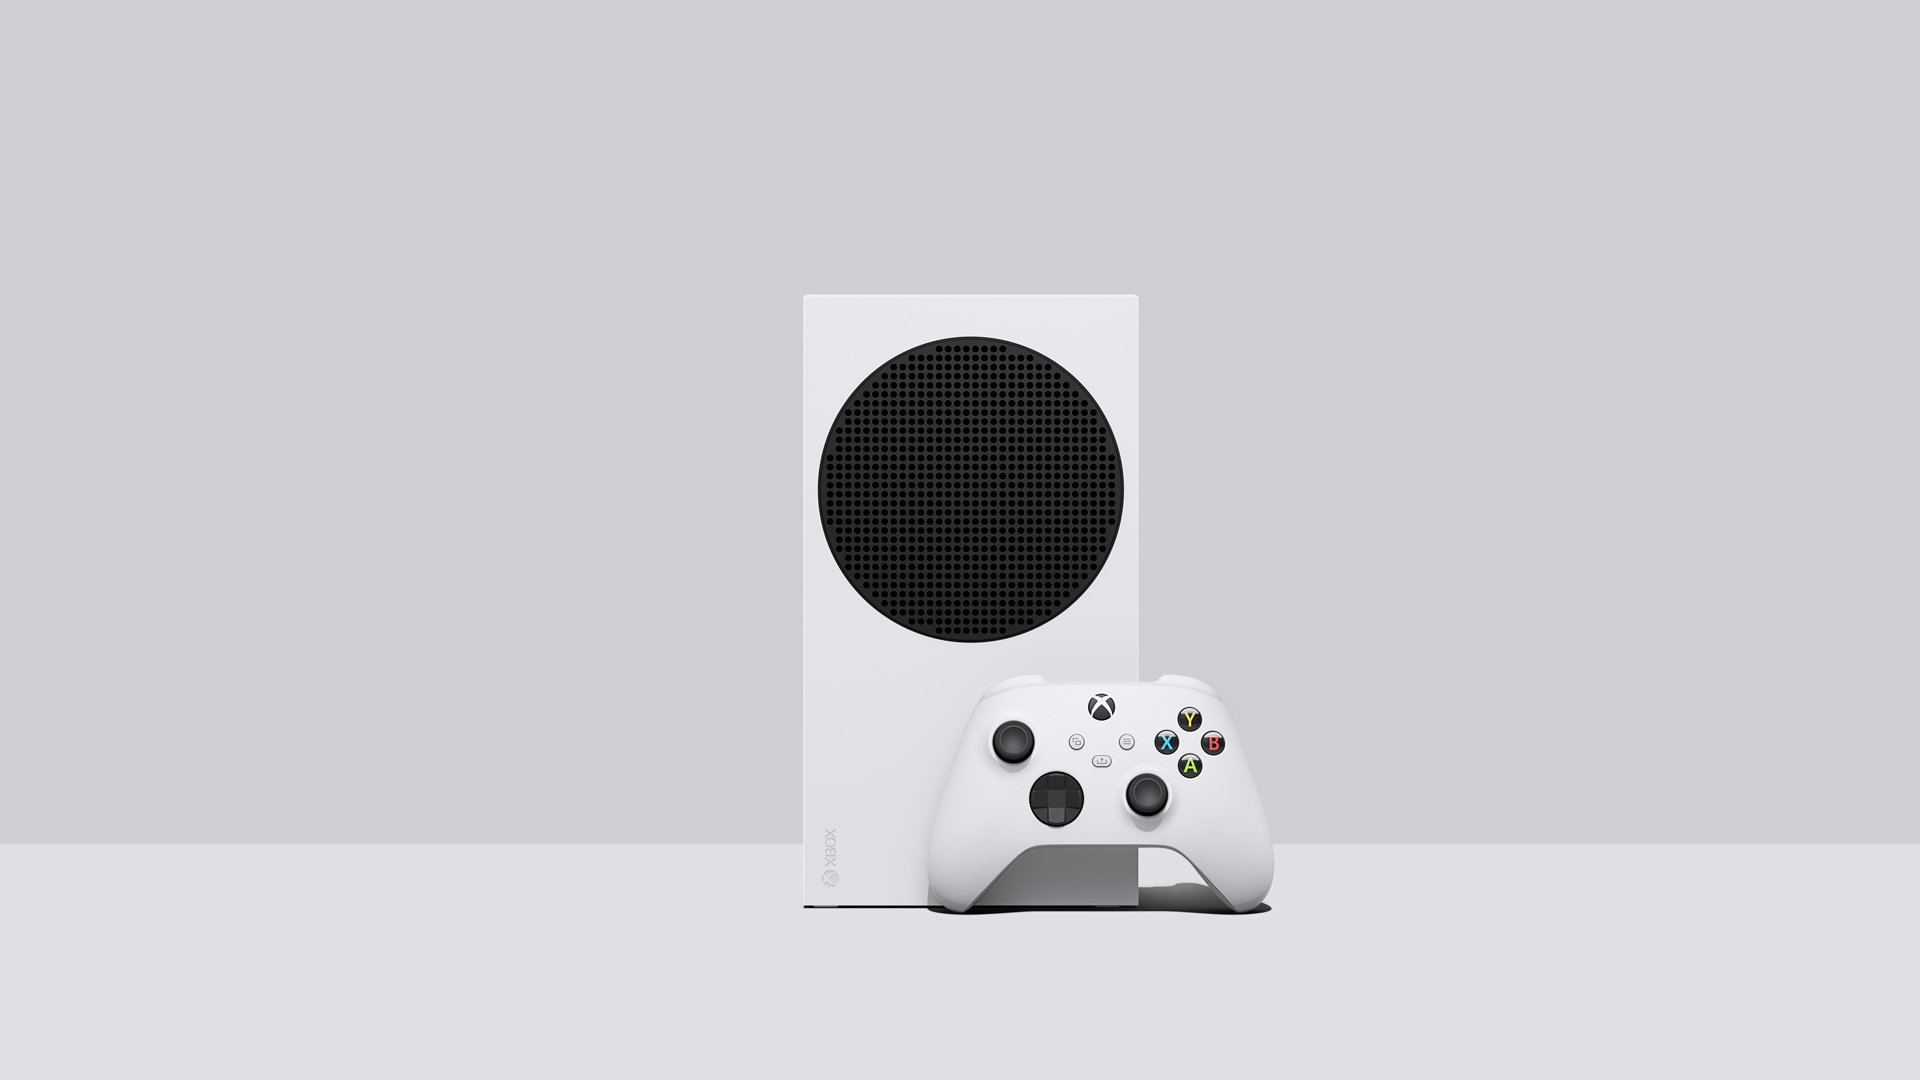 Xbox Series X and Xbox Series S: Designing the Next Generation of Consoles